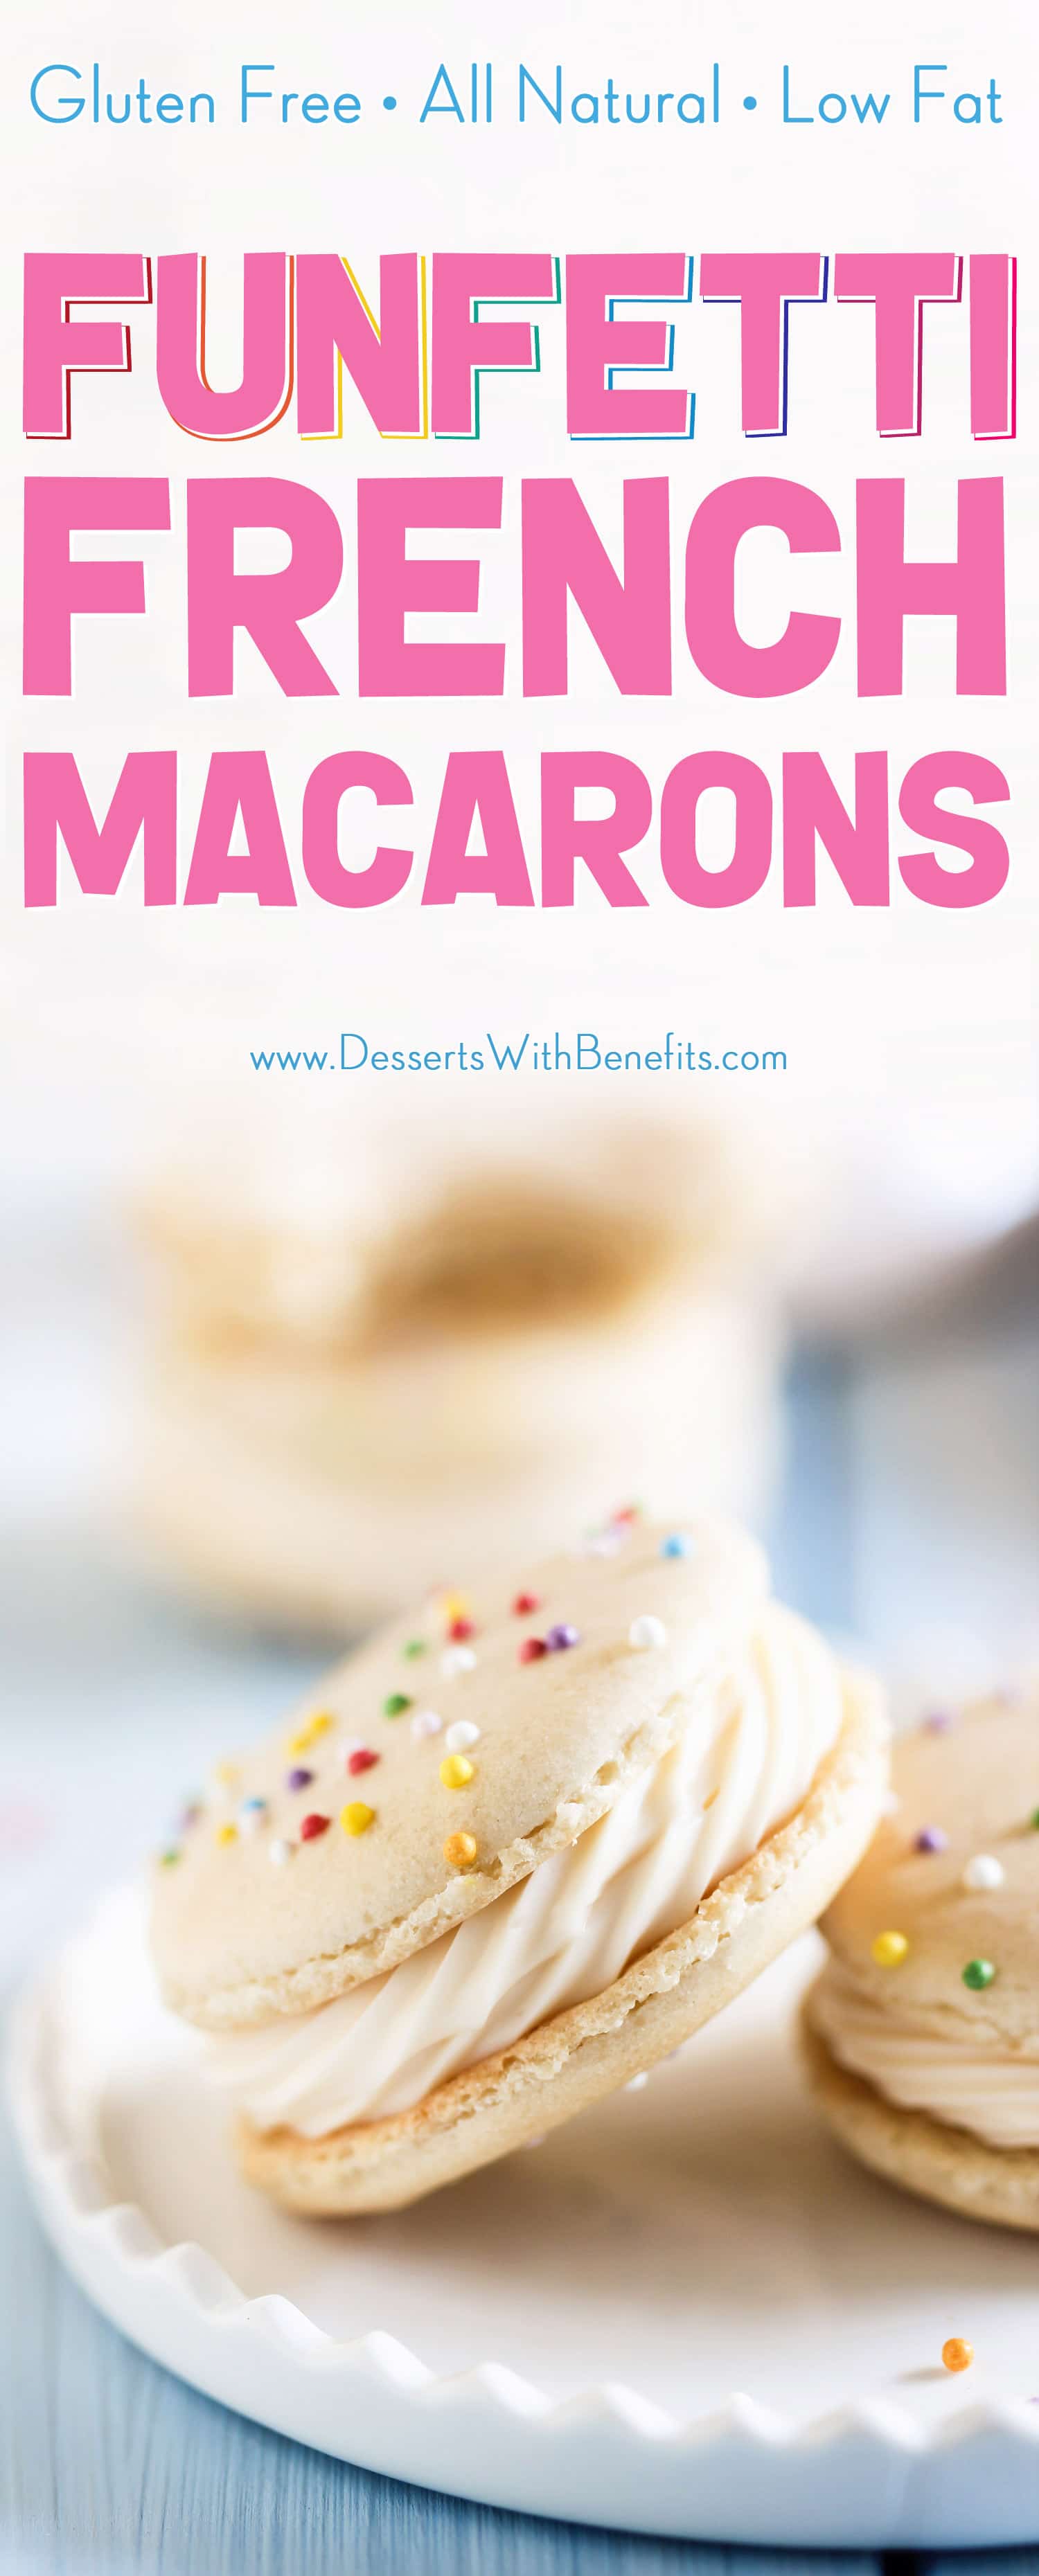 (How to make French Macarons) These bakery-worthy Funfetti French Macarons are adorable, bite-sized, sweet perfection! You'd never know they're made without white sugar, artificial flavorings, and artificial food dyes. These are all natural, low fat, and gluten free. Perfect for birthdays, parties, and celebrations.